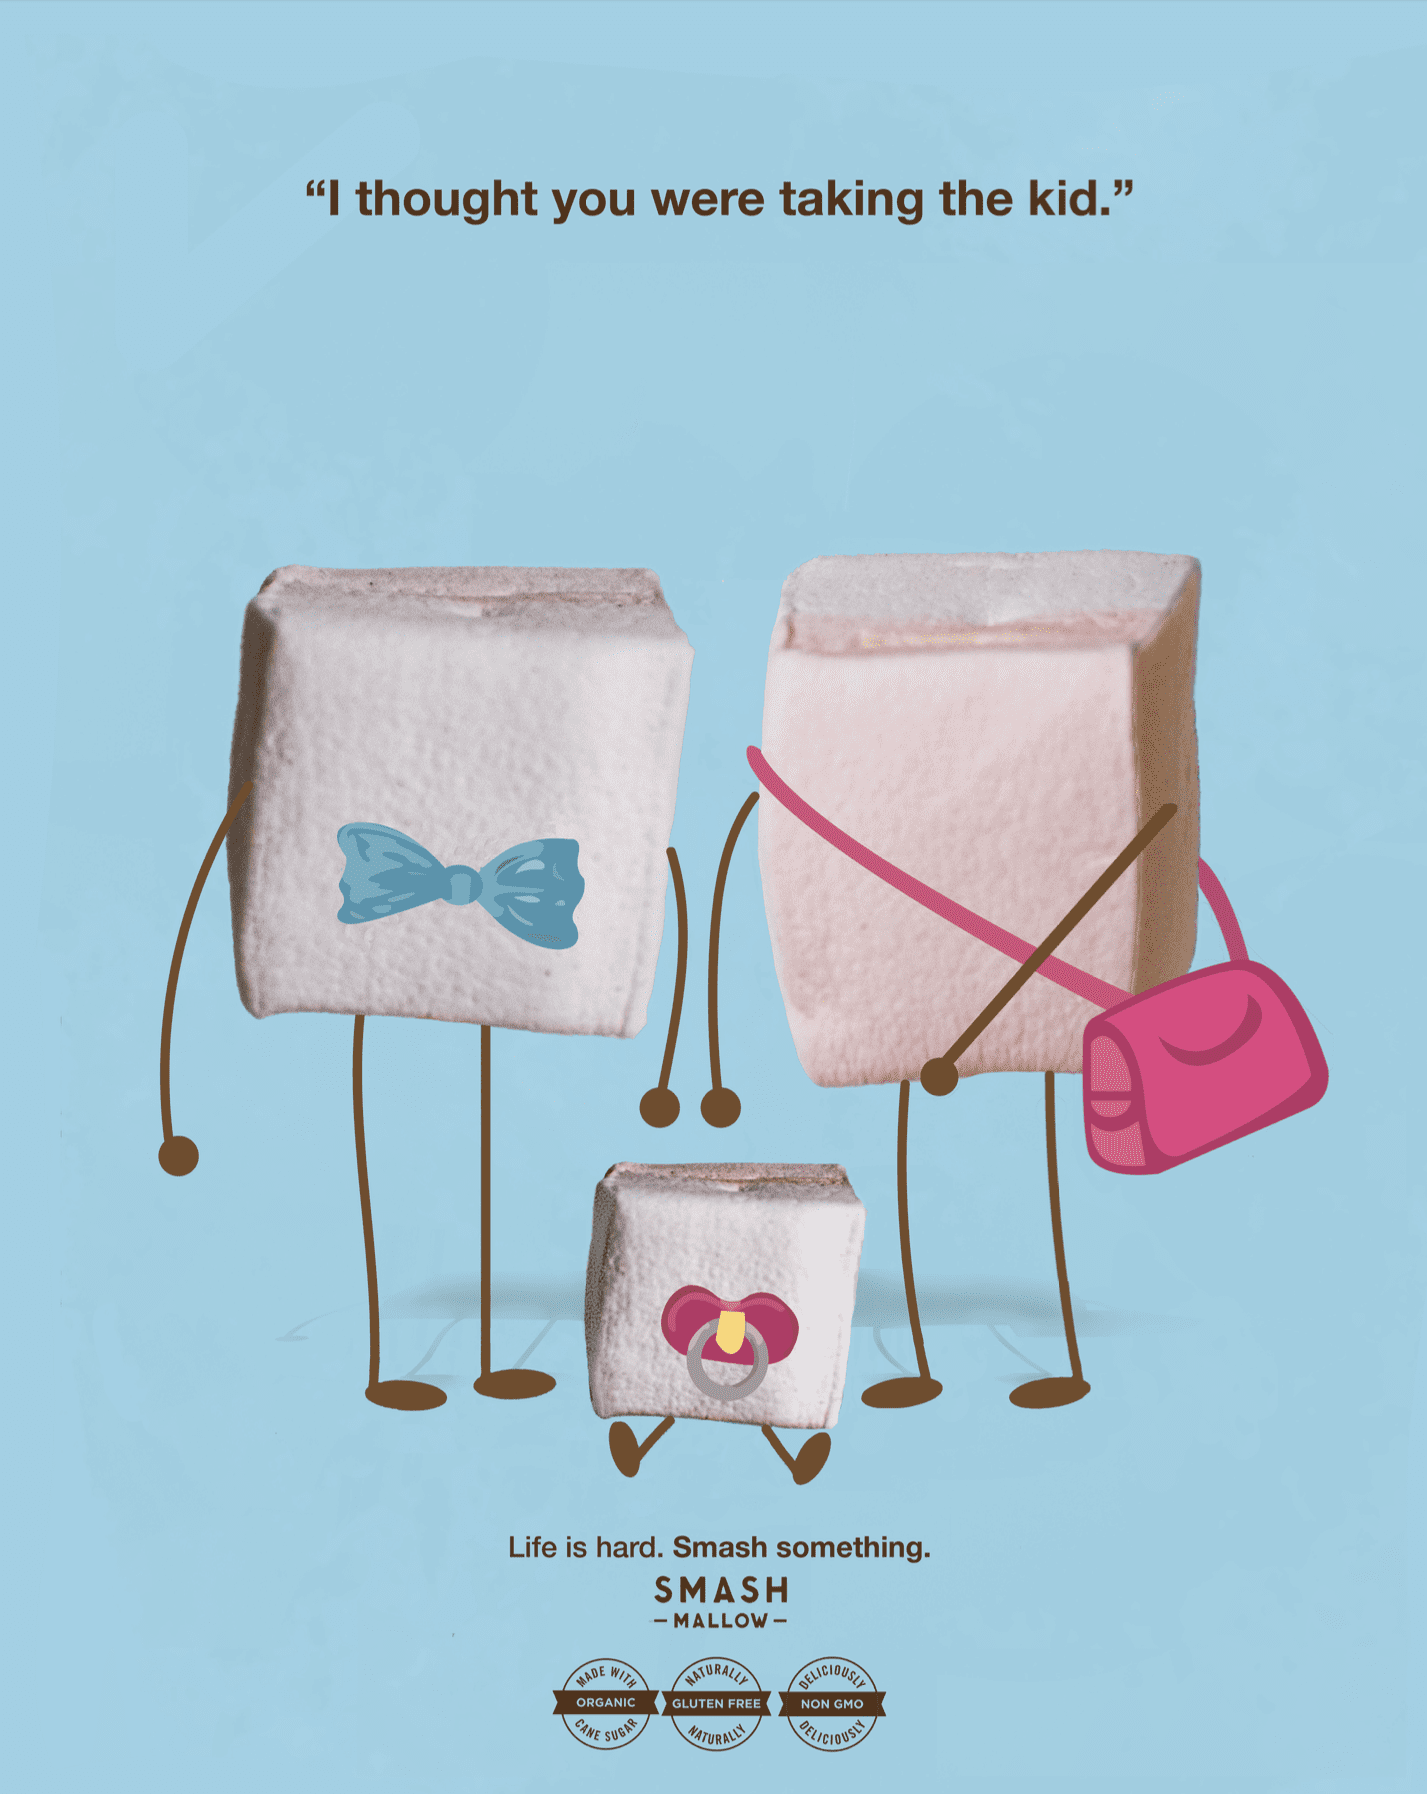 Advertisement of Smash Mallow marshmallows. Two adult Cube marshmallows with a baby marshmallow on a blue background. Text says "I thought you were taking the kid"